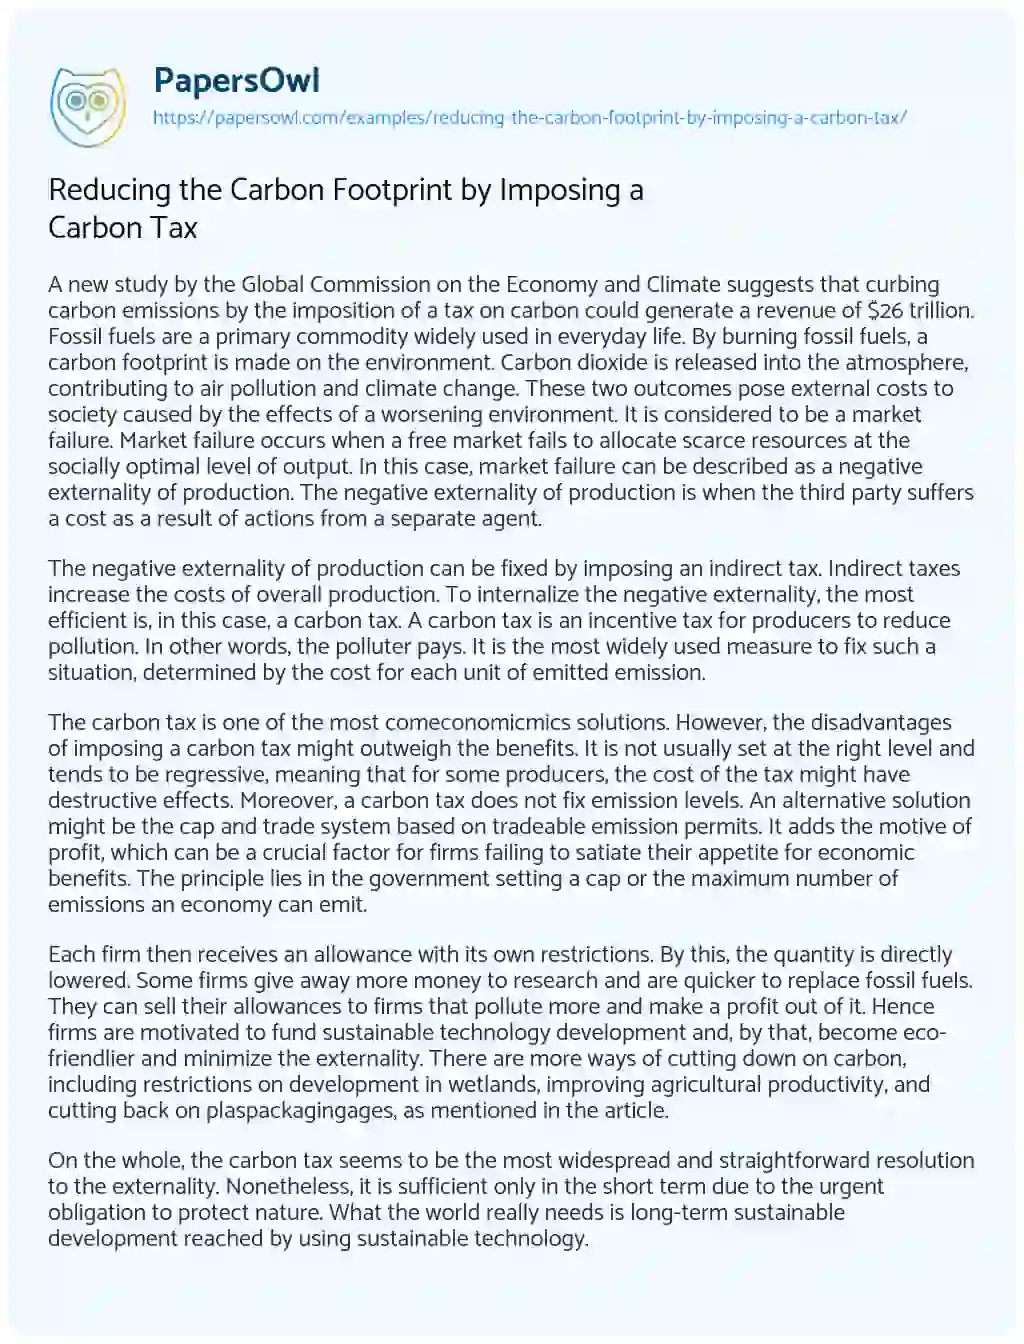 Essay on Reducing the Carbon Footprint by Imposing a Carbon Tax